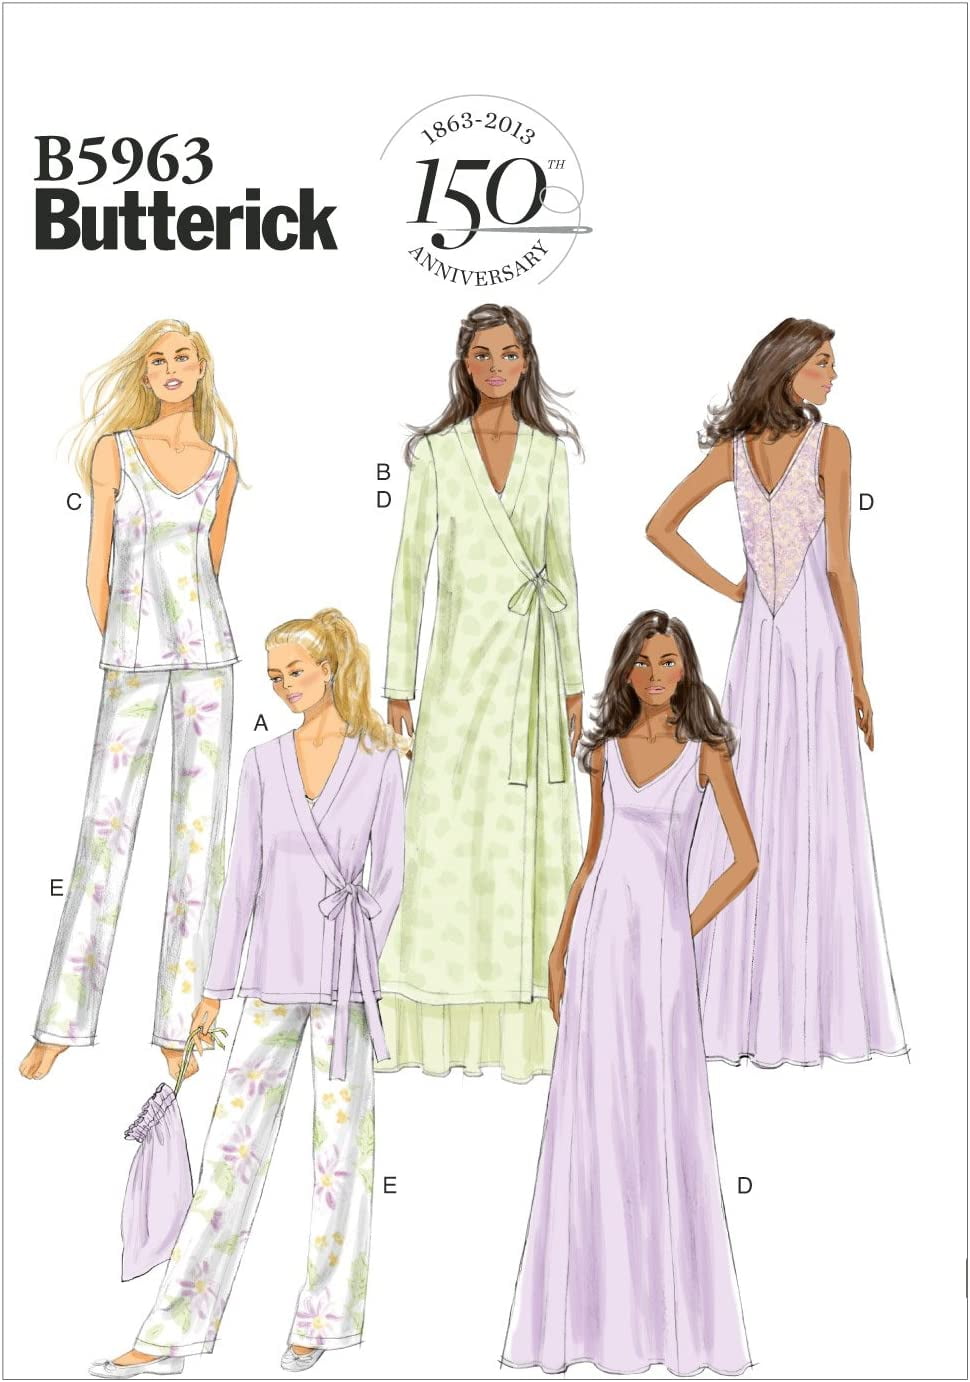 Butterick Patterns B5963 Misses' Robe, Top, Gown, Pants and Bag Sewing  Templates, Size A5 ( 14) 